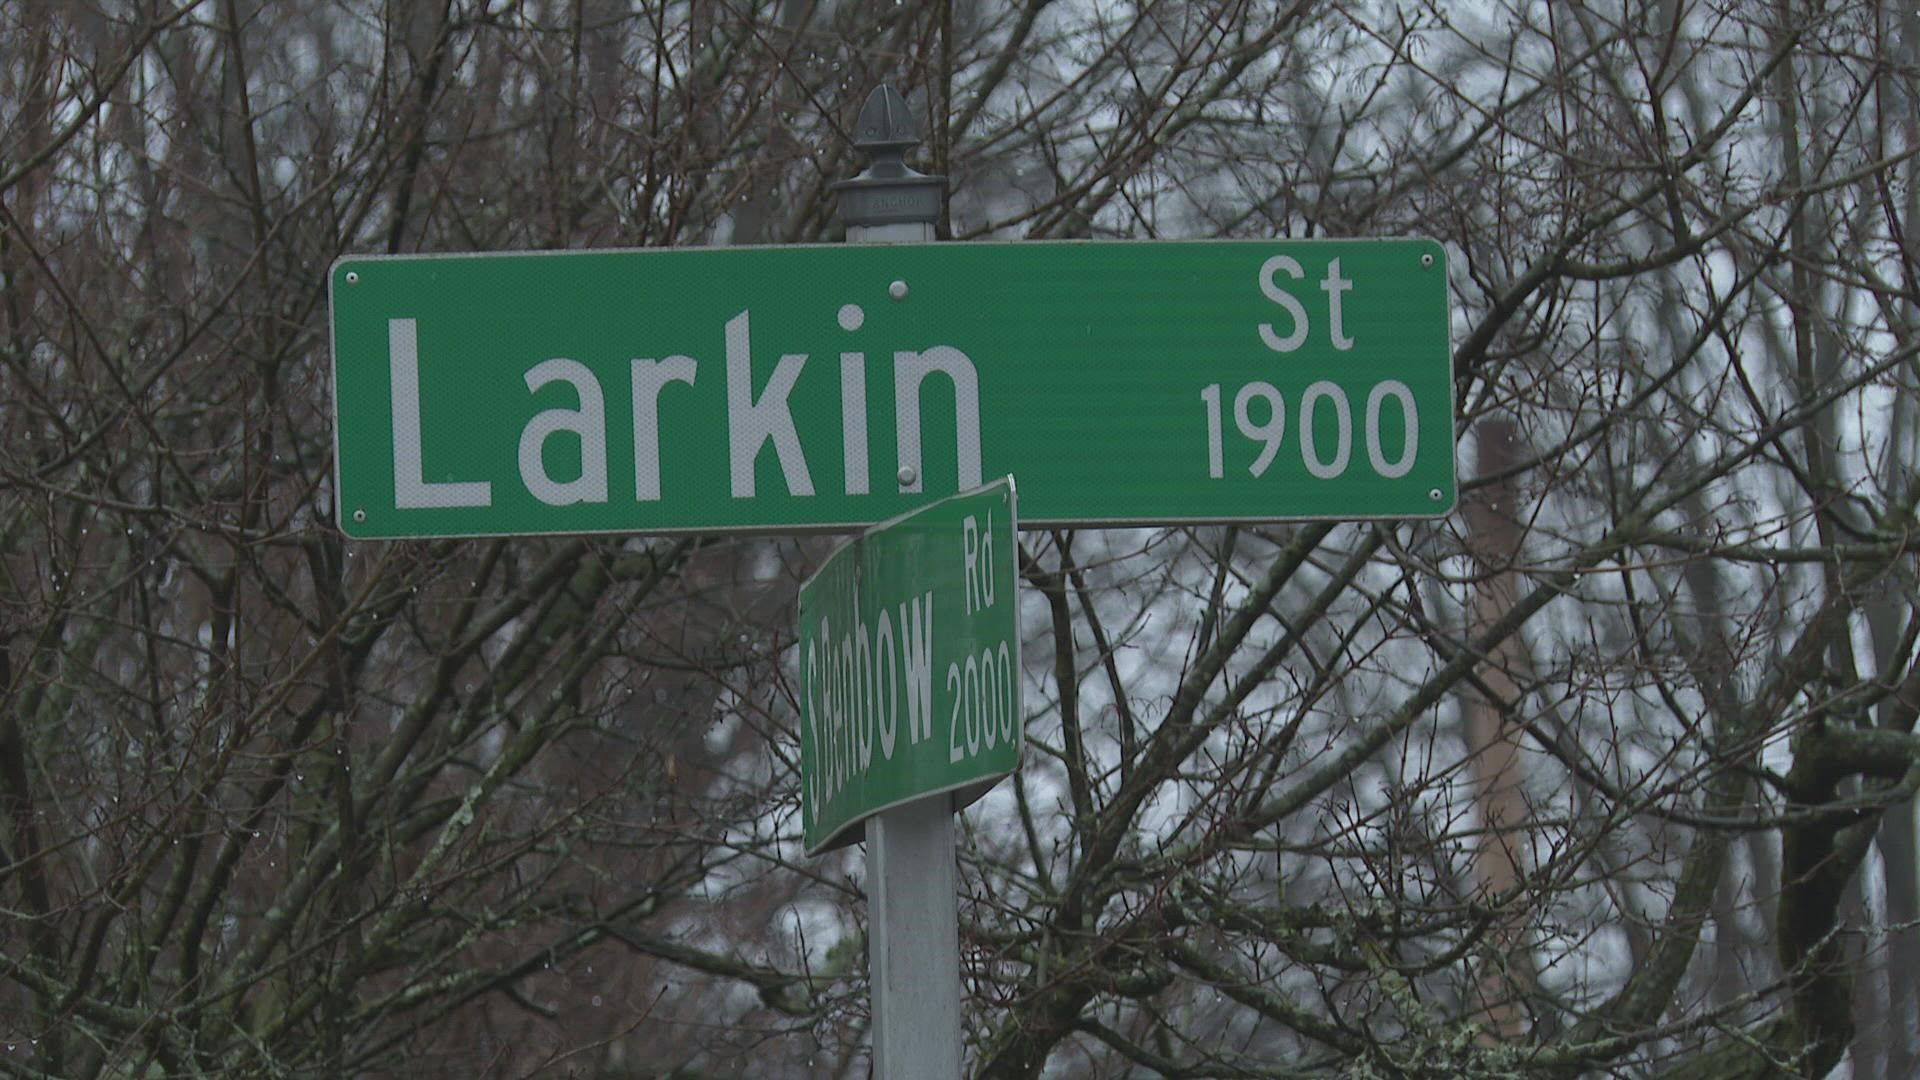 31-year-old Jordan Mckale Little died after being sent to the hospital after an attack on Larkin Street.